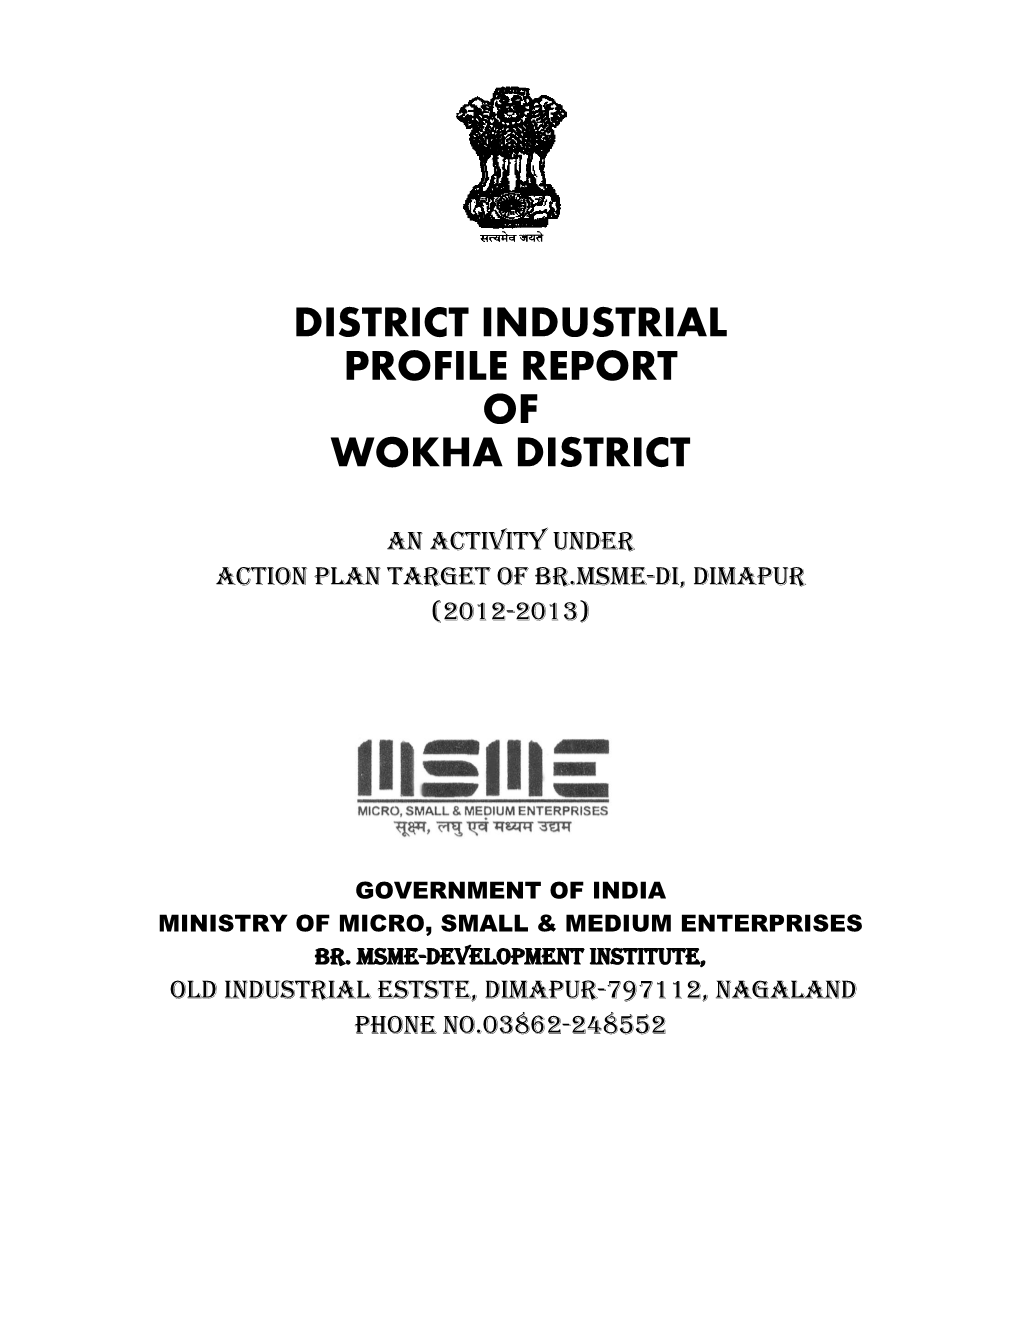 District Industrial Profile Report of Wokha District